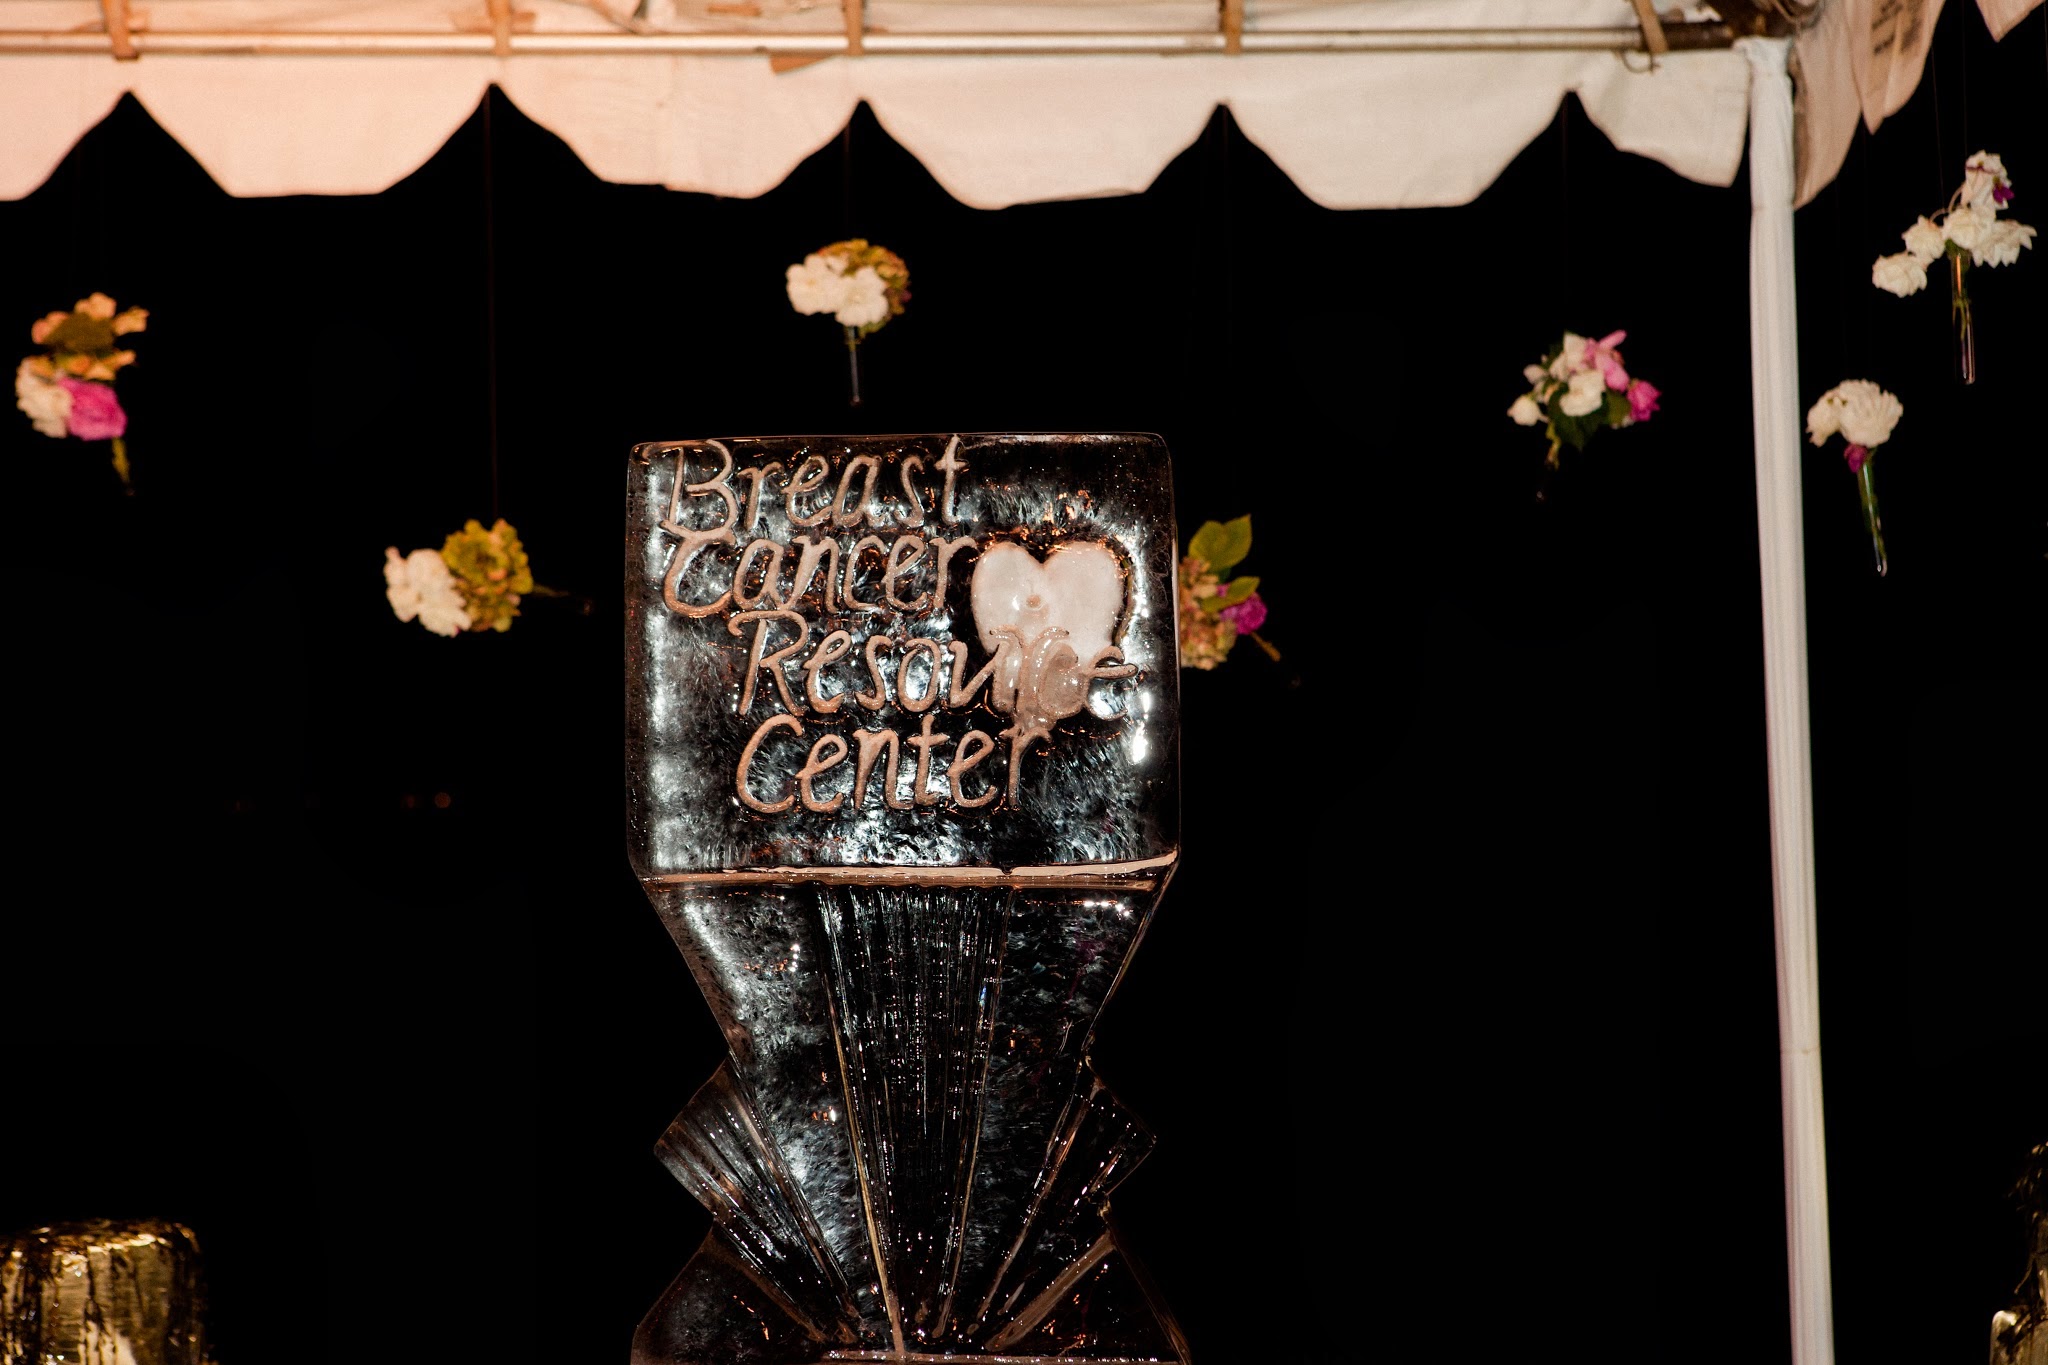 www.FeliciEvents | Pink Polo Party | Funraising Event | Felici Fundraiser | Polo Theme | Clarissa Koenig Photography | Ice Sculpture